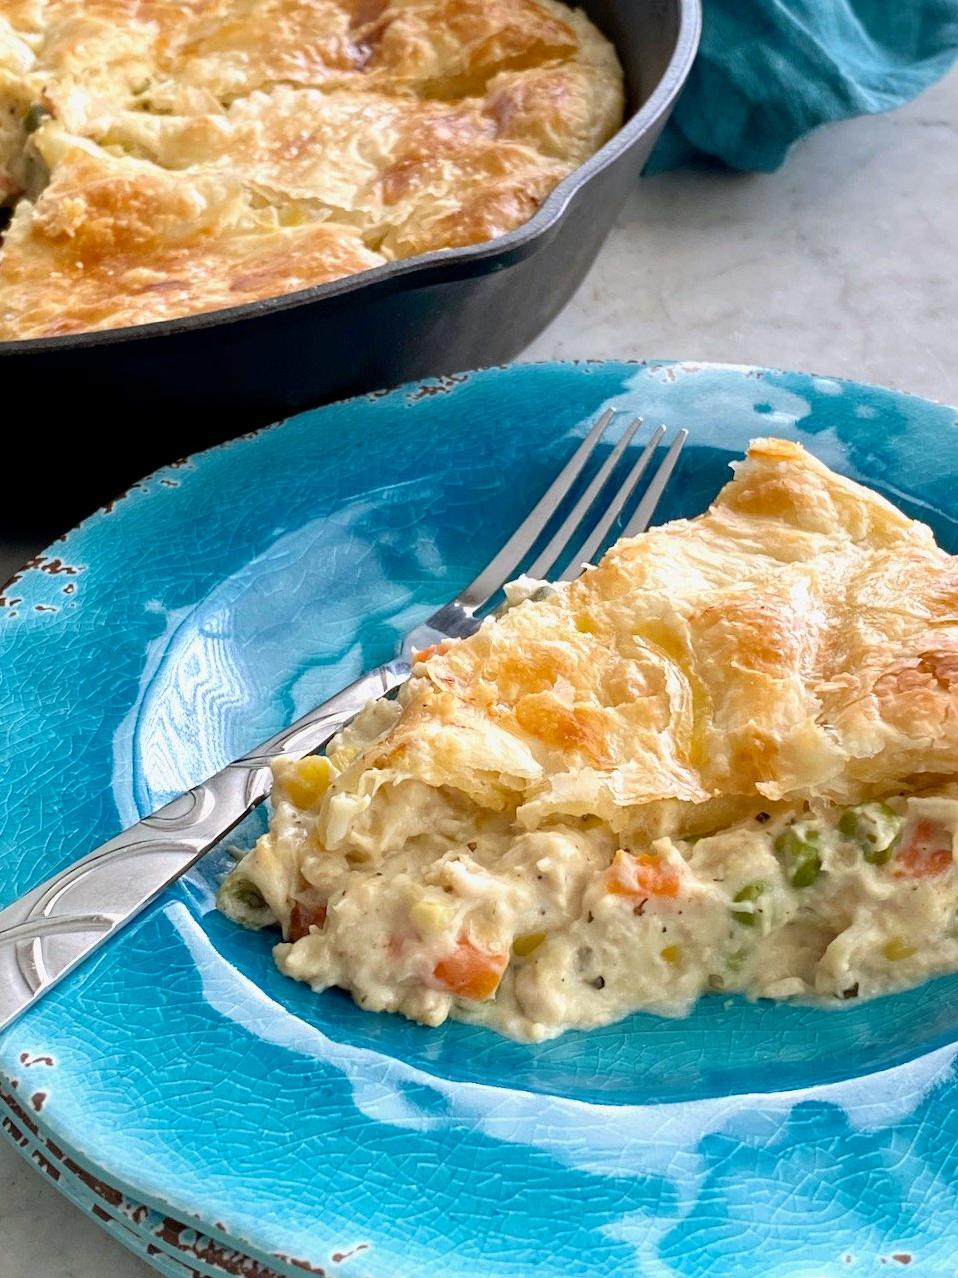  Filled with tender chicken, veggies, and spices, this pie will warm your soul.